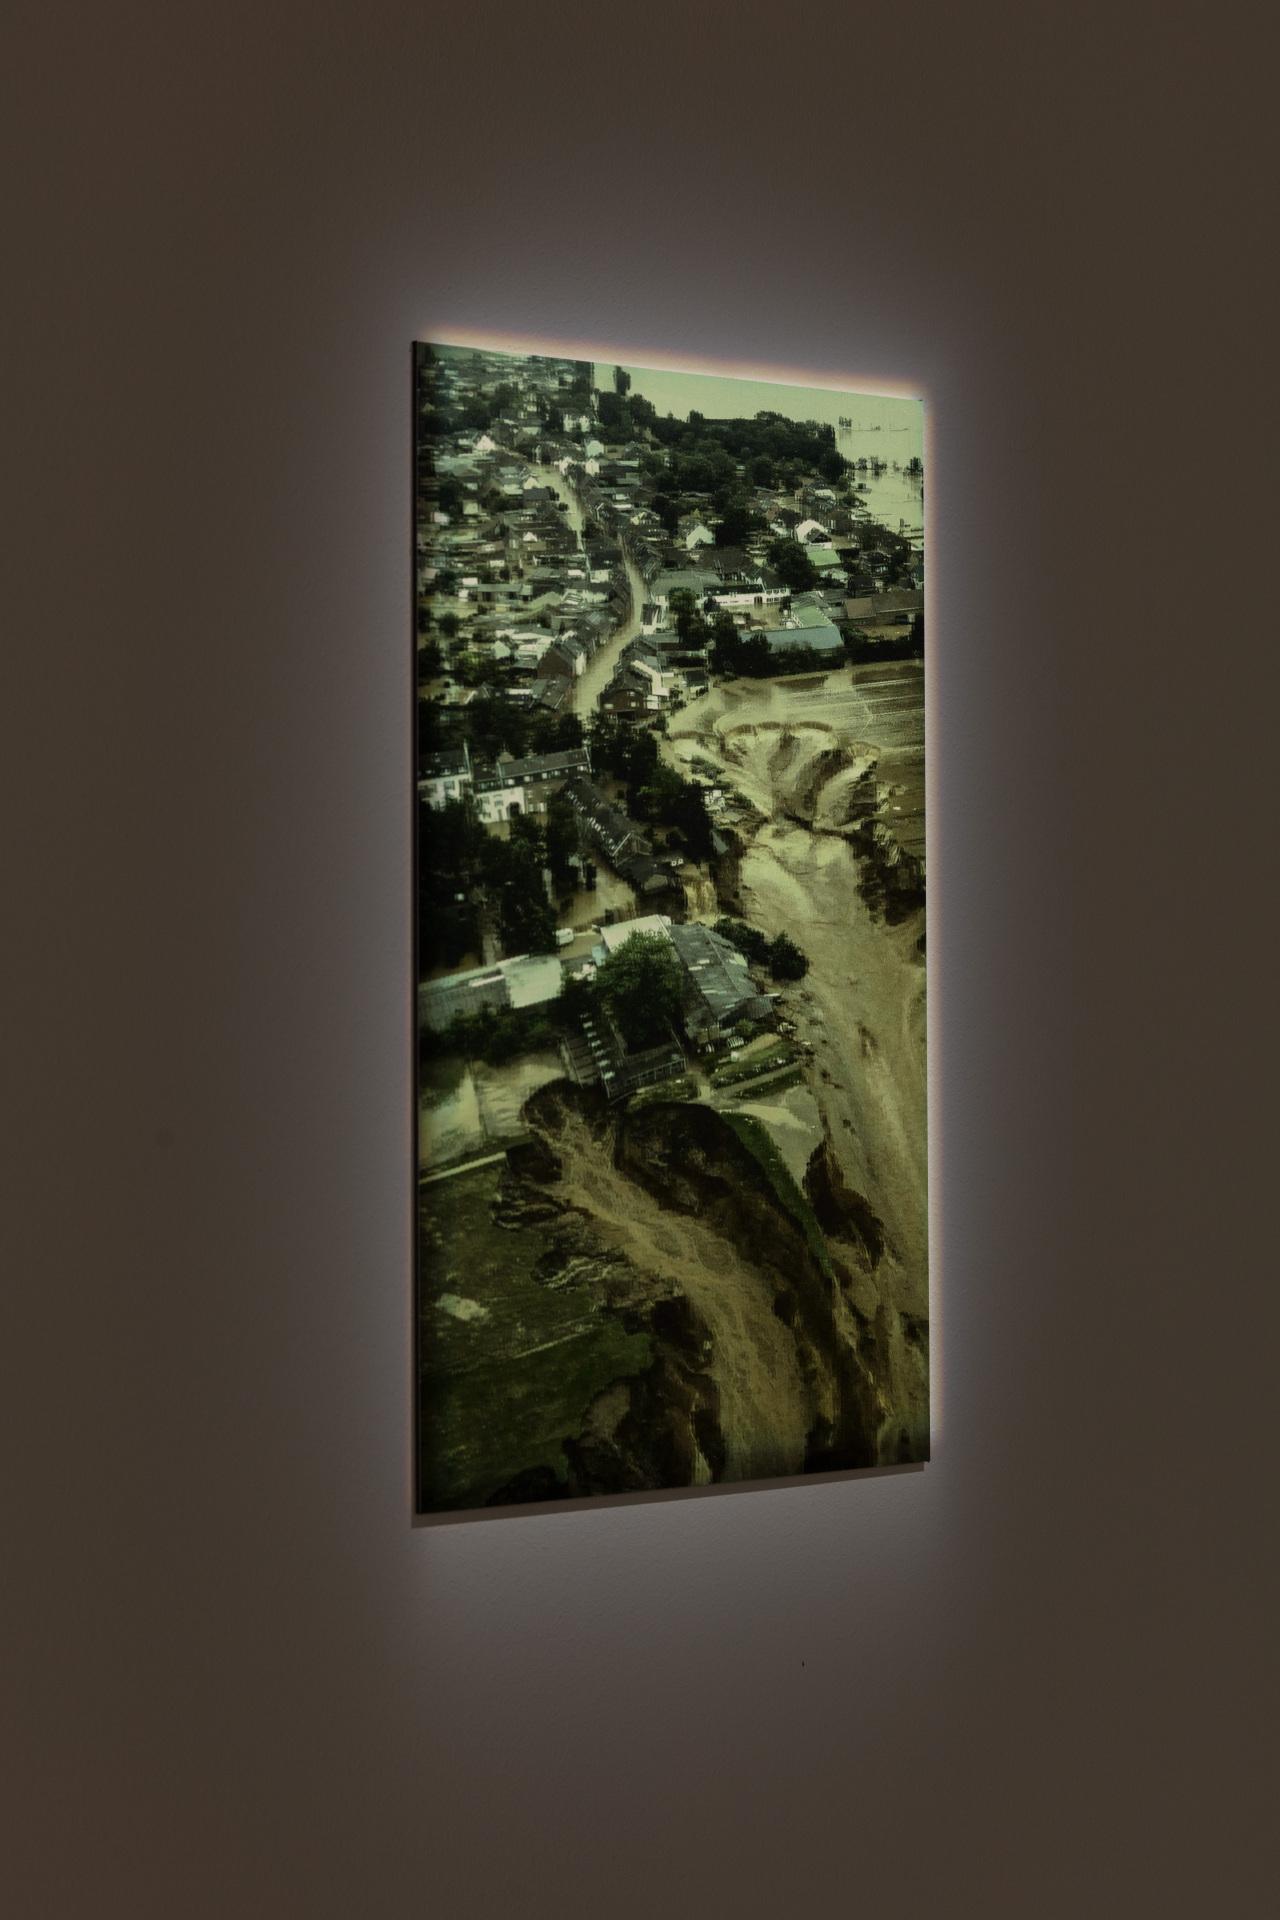 illuminated picture of the flooded city of Erftstadt in North Rhine-Westphalia, hanging on the wall